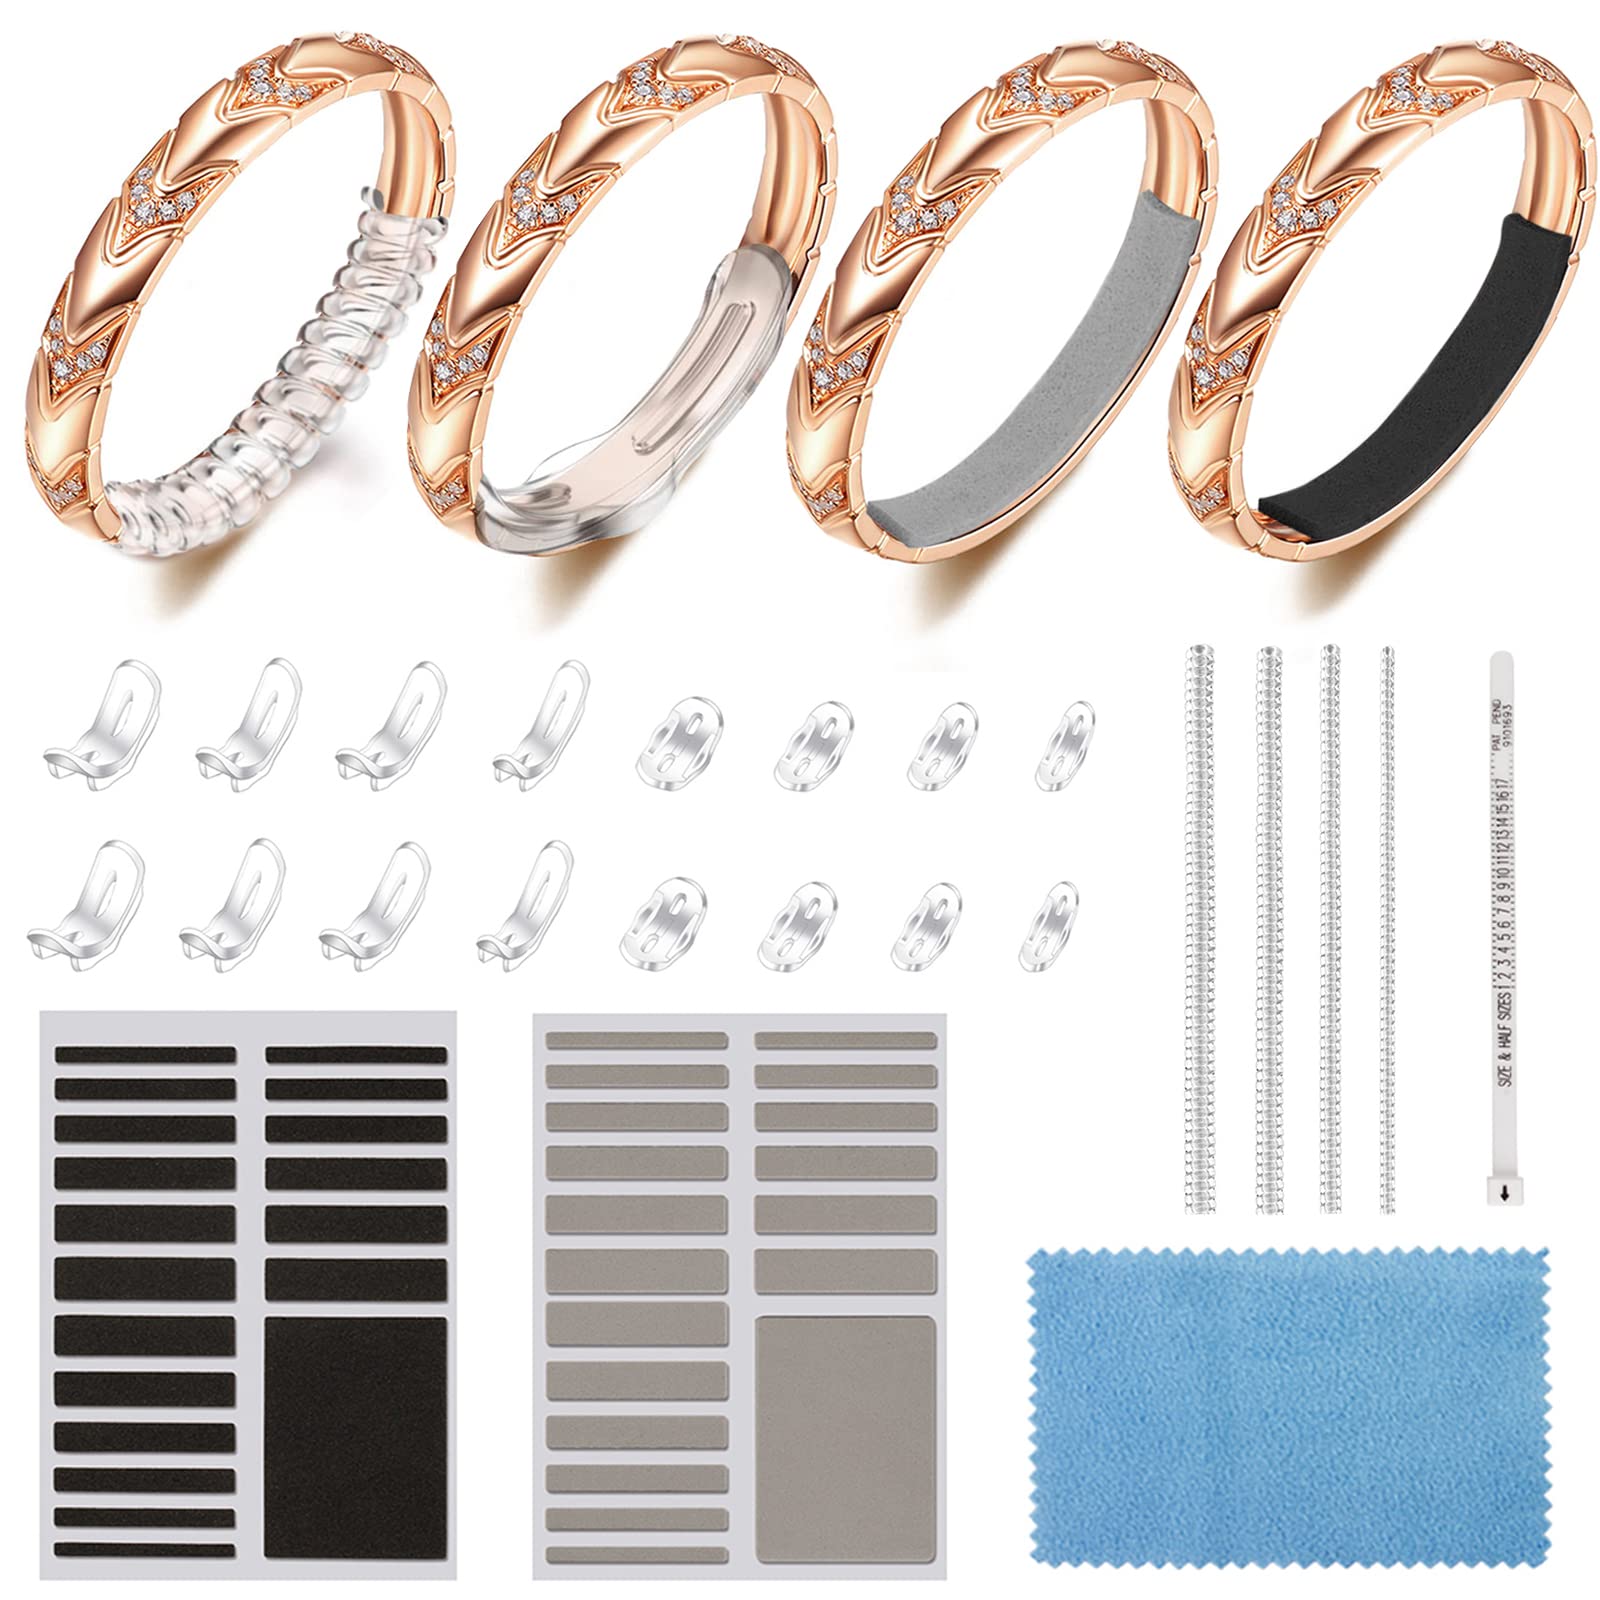 Ring Size Adjuster for Loose Rings, Multiple Size, Ring Sizer, Mandrel for  Making Jewelry Guard, Resizer, Spacer, Spiral Silicone Tightener Set with  Polishing Cloth